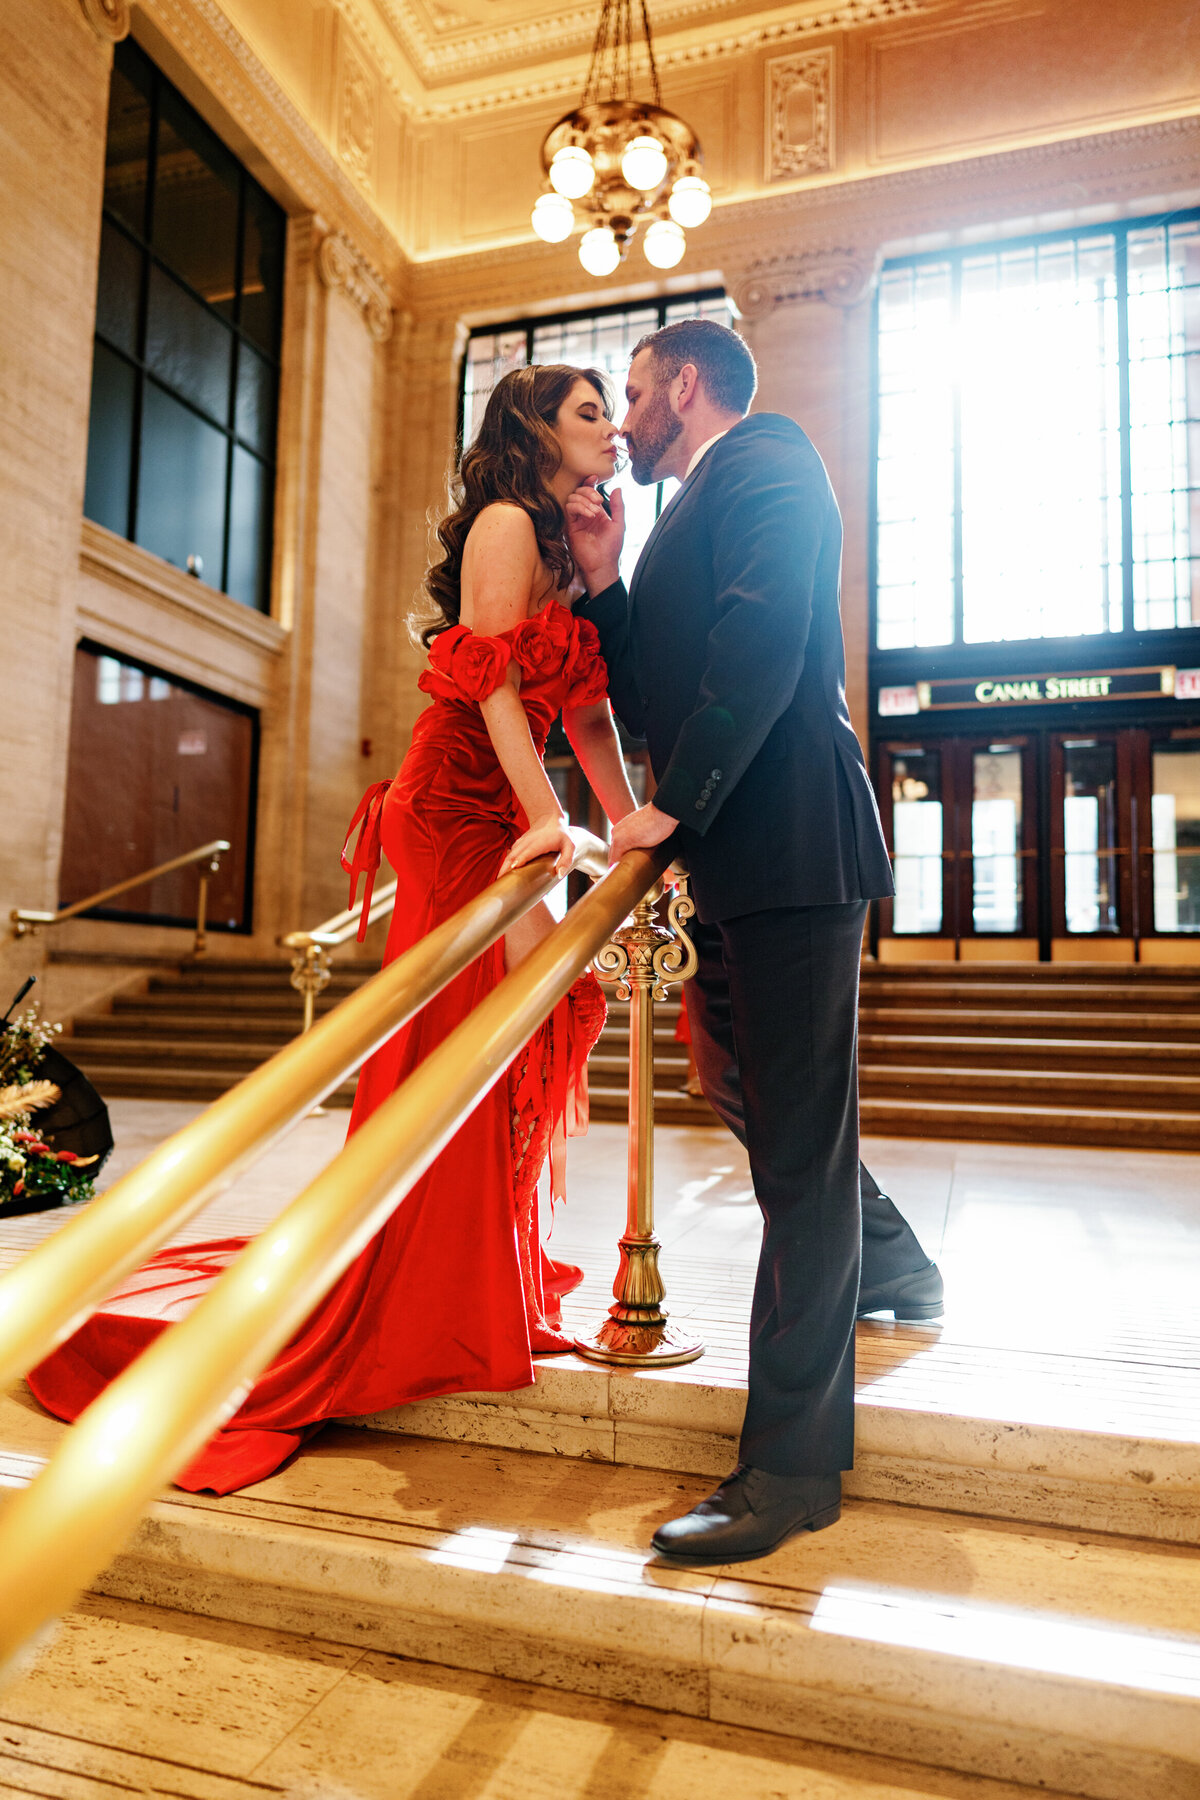 Aspen-Avenue-Chicago-Wedding-Photographer-Union-Station-Chicago-Theater-Engagement-Session-Timeless-Romantic-Red-Dress-Editorial-Stemming-From-Love-Bry-Jean-Artistry-The-Bridal-Collective-True-to-color-Luxury-FAV-41